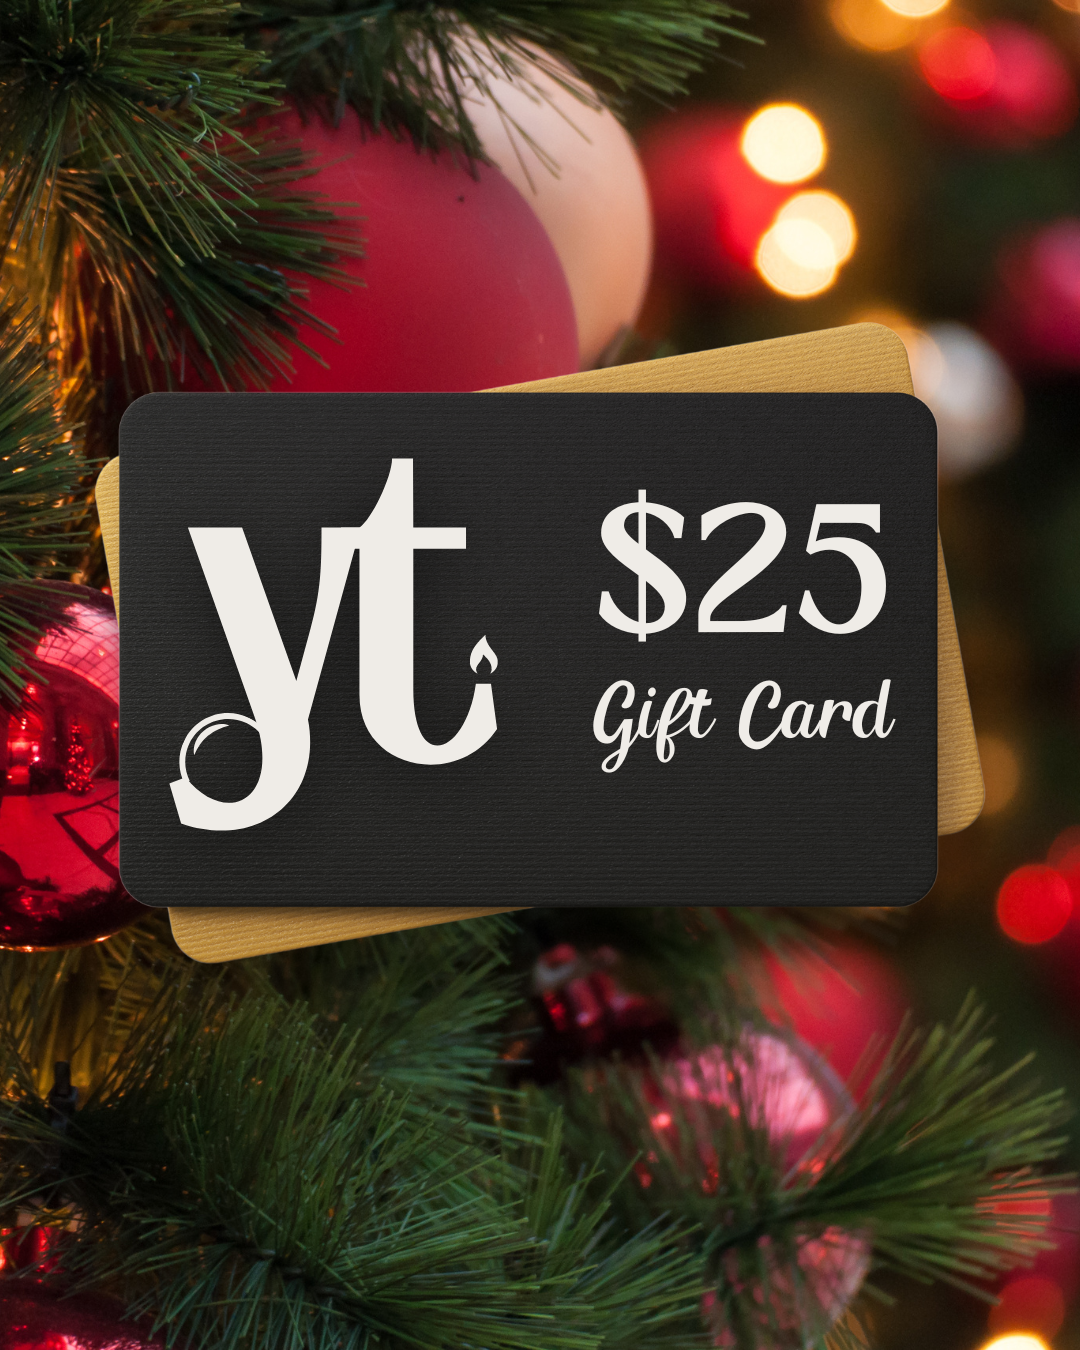 YT. gift cards